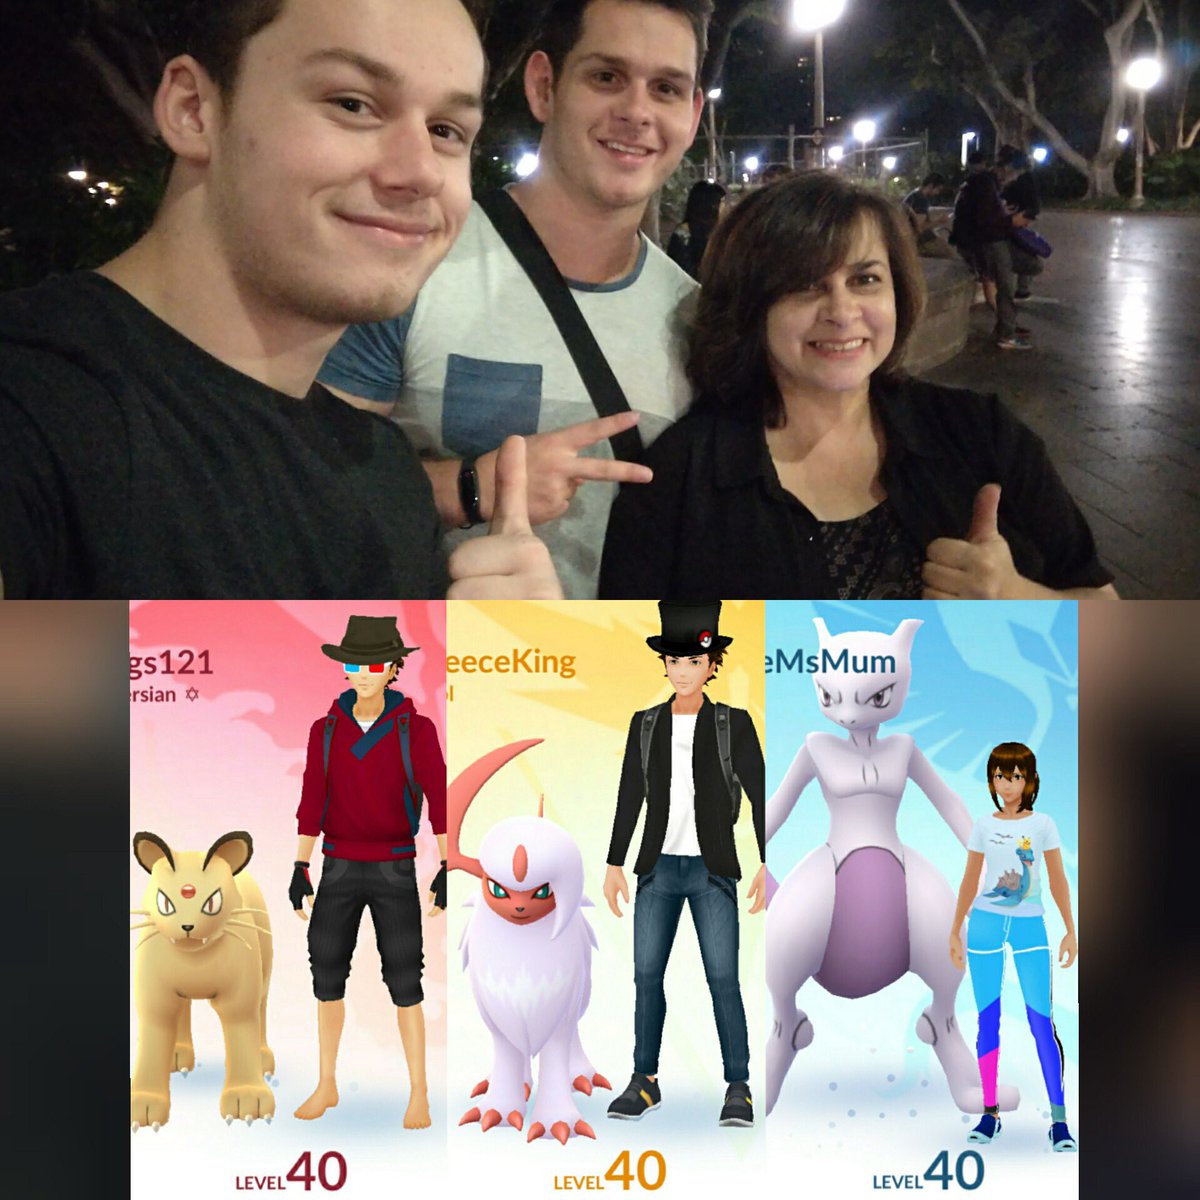 My mother hit level 40 today in Pokémon Go. She started her account last July, works full time, attends & helps out at a local church every Sunday, and is also doing a university degree. My brother, Mum and I are all level 40 now, this game has become a family thing for us. 🎉